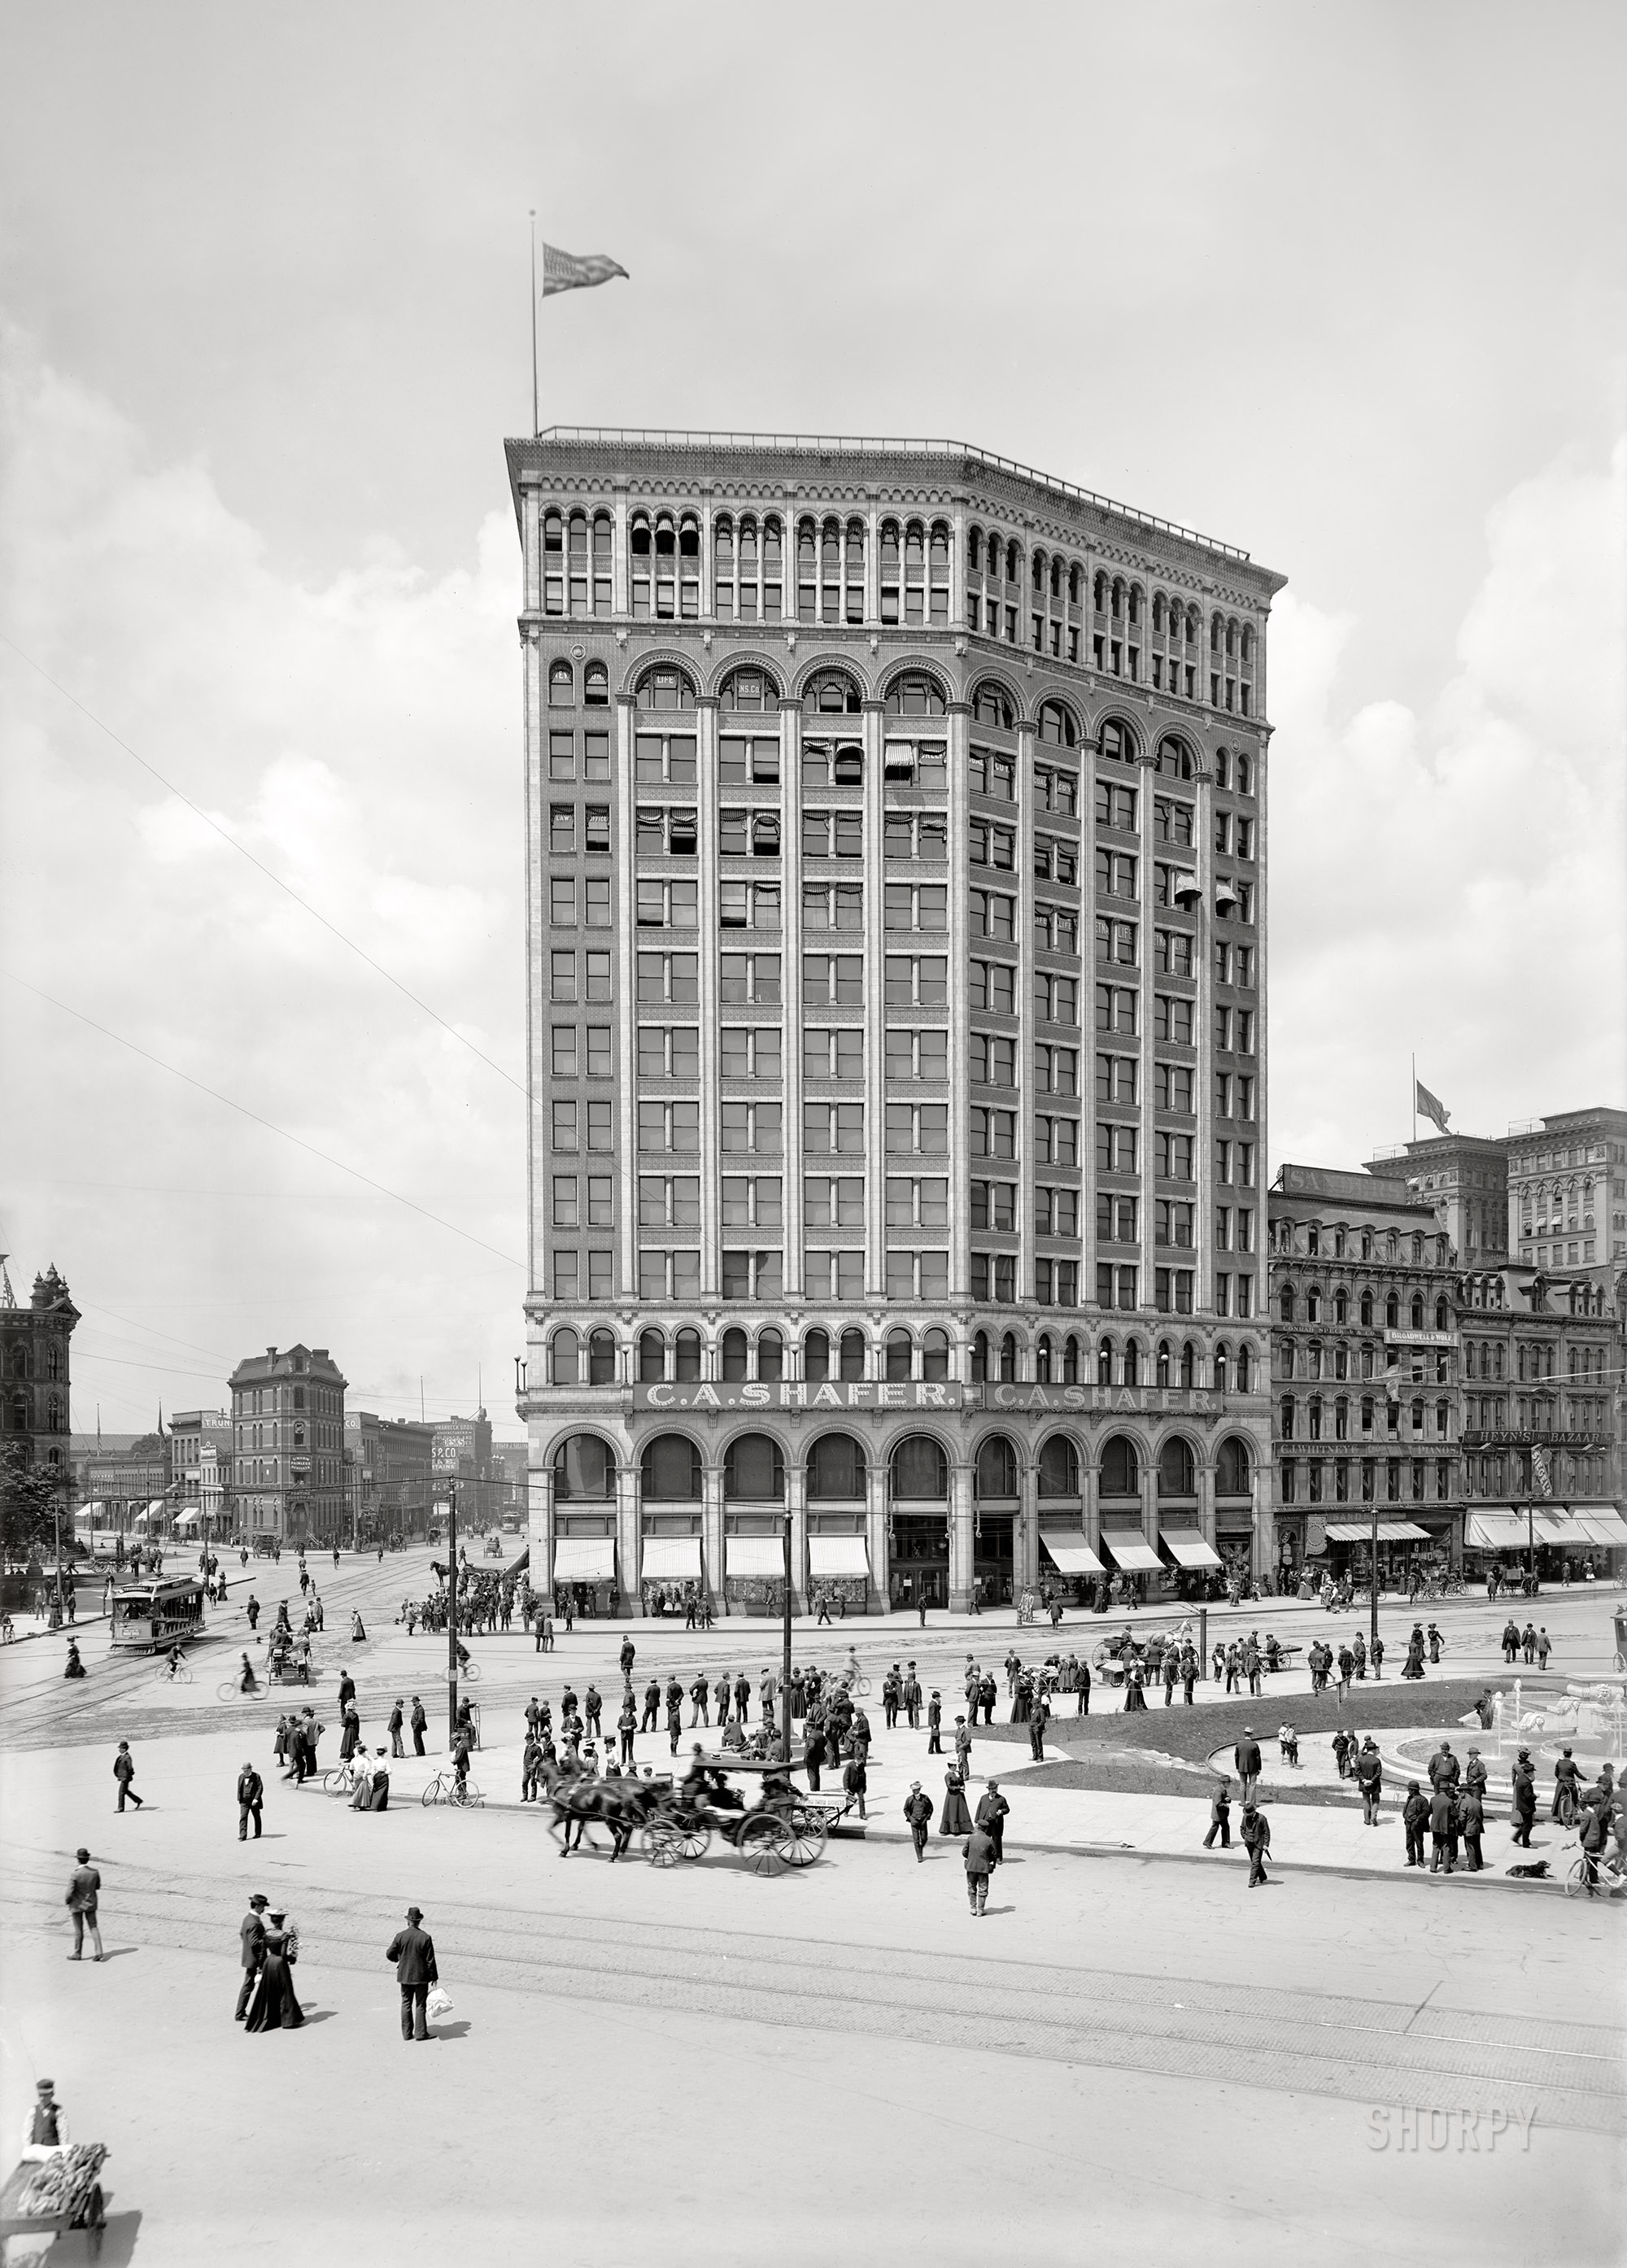 Detroit circa 1900. "Majestic Building and Campus Martius."  The Motor City, back when bicycles and horses filled the streets. 8x10 glass negative. View full size.